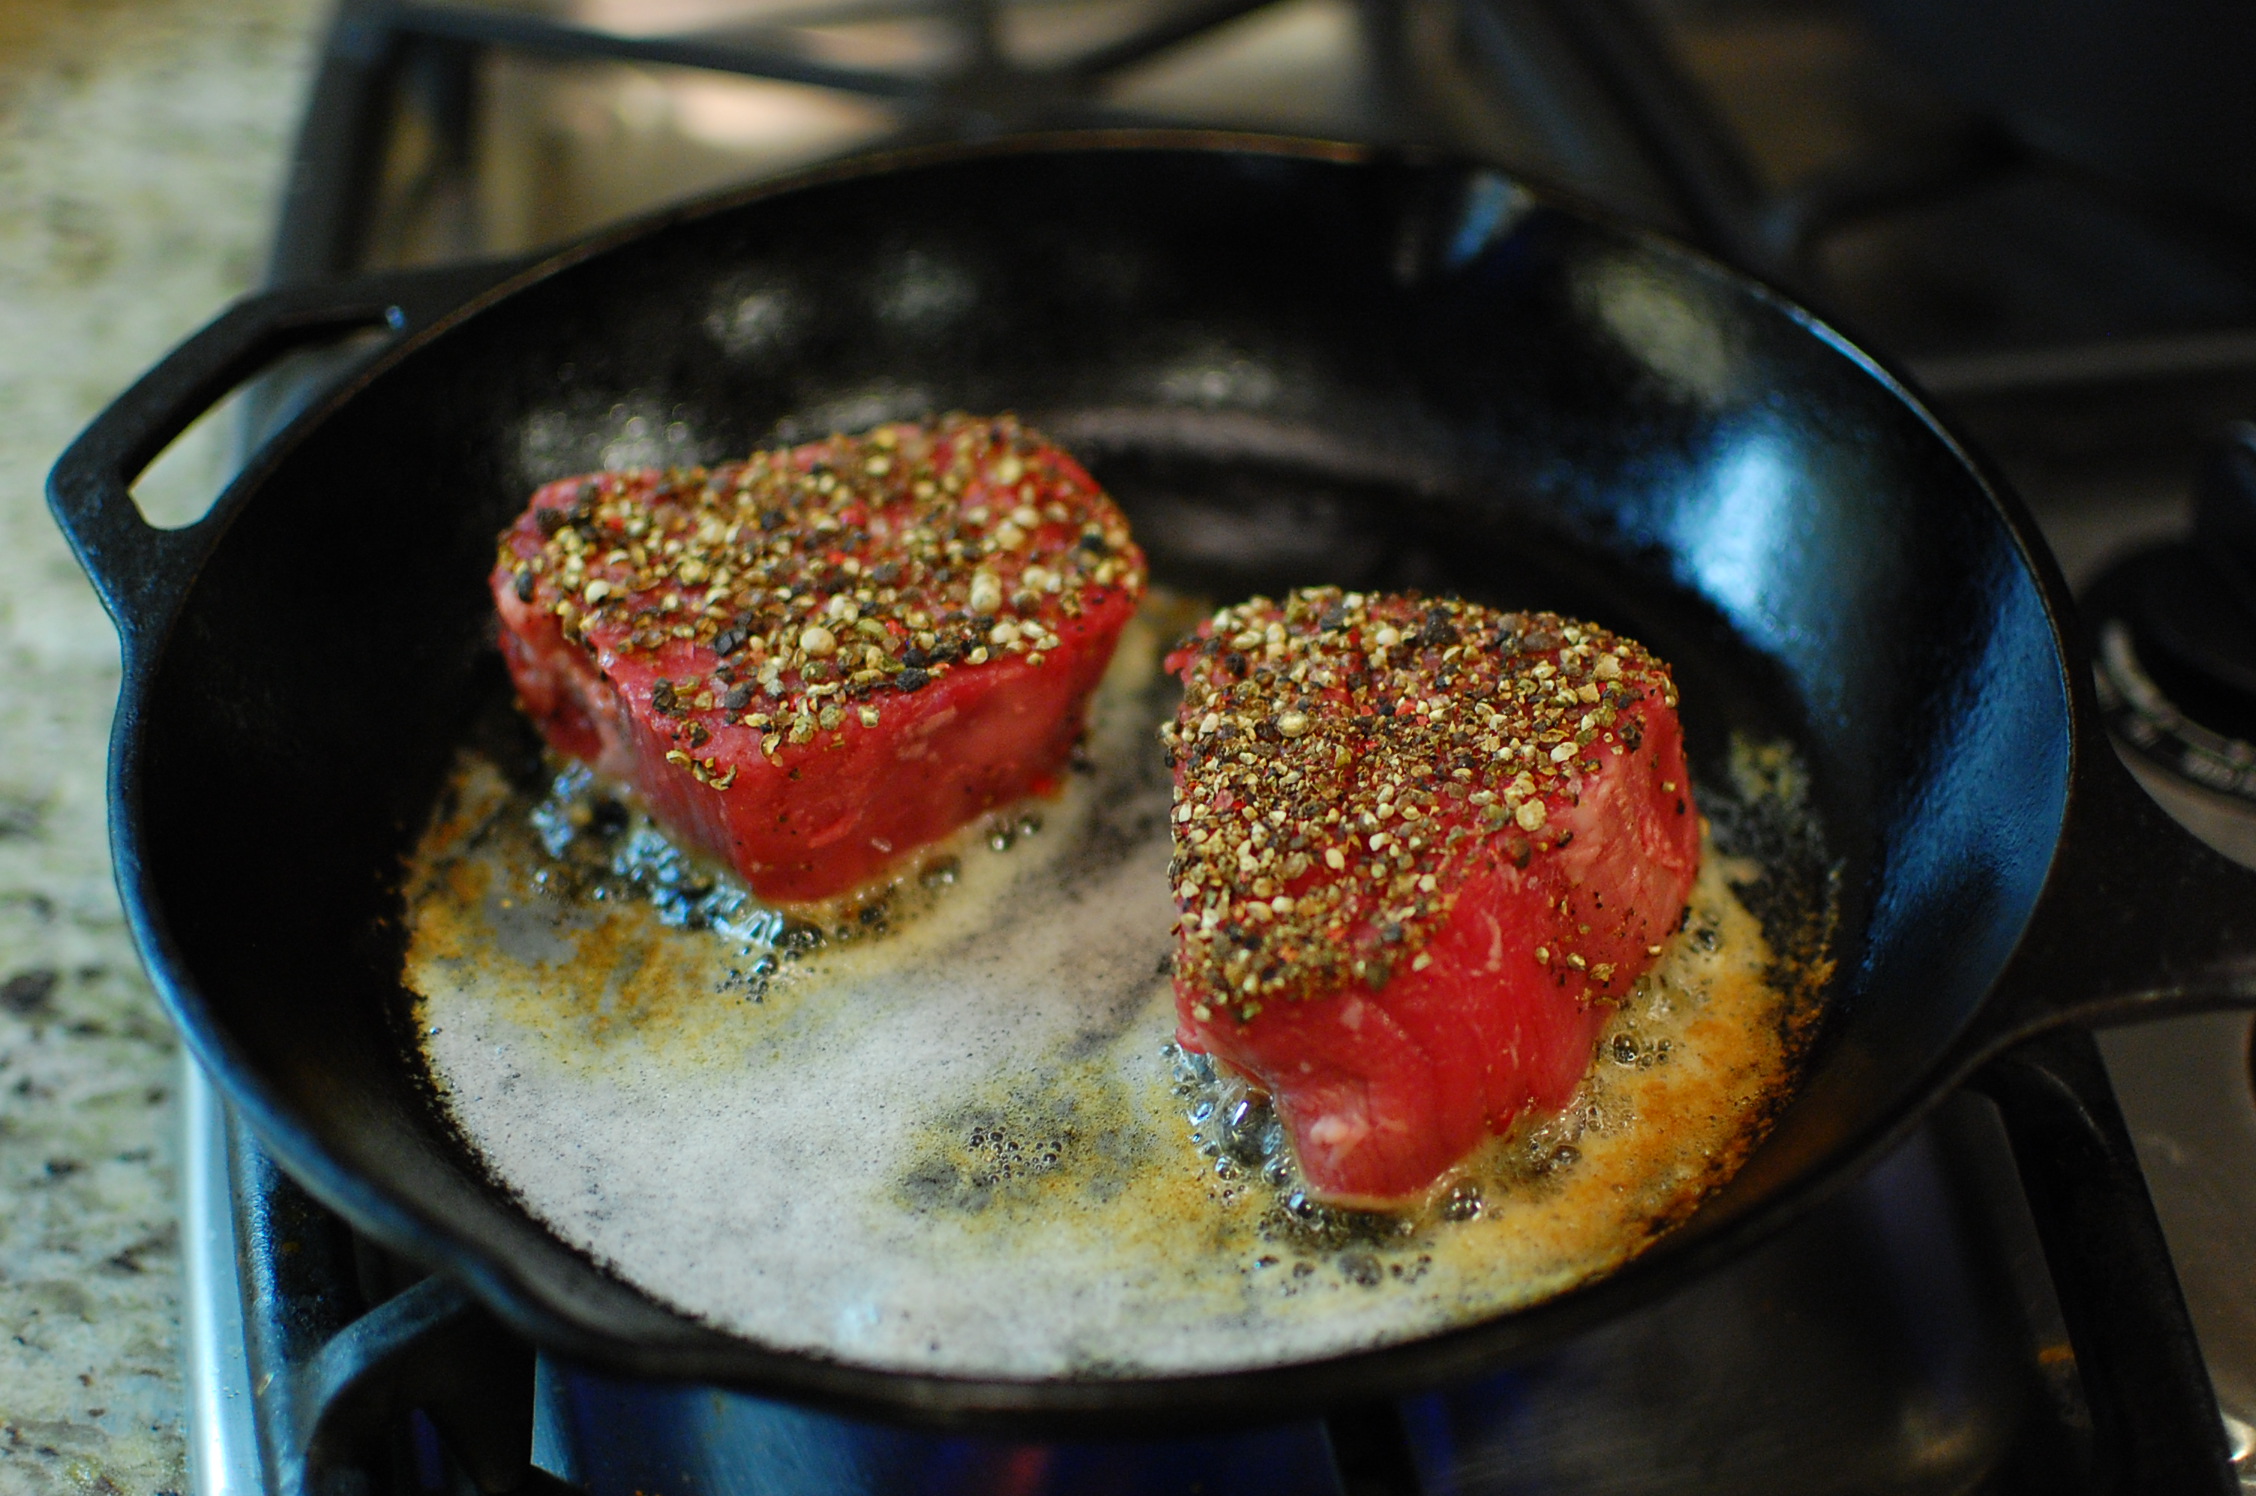 Steak Au Poivre How To Cook Filet Mignon Steak In A Pan The 350 Degree Oven